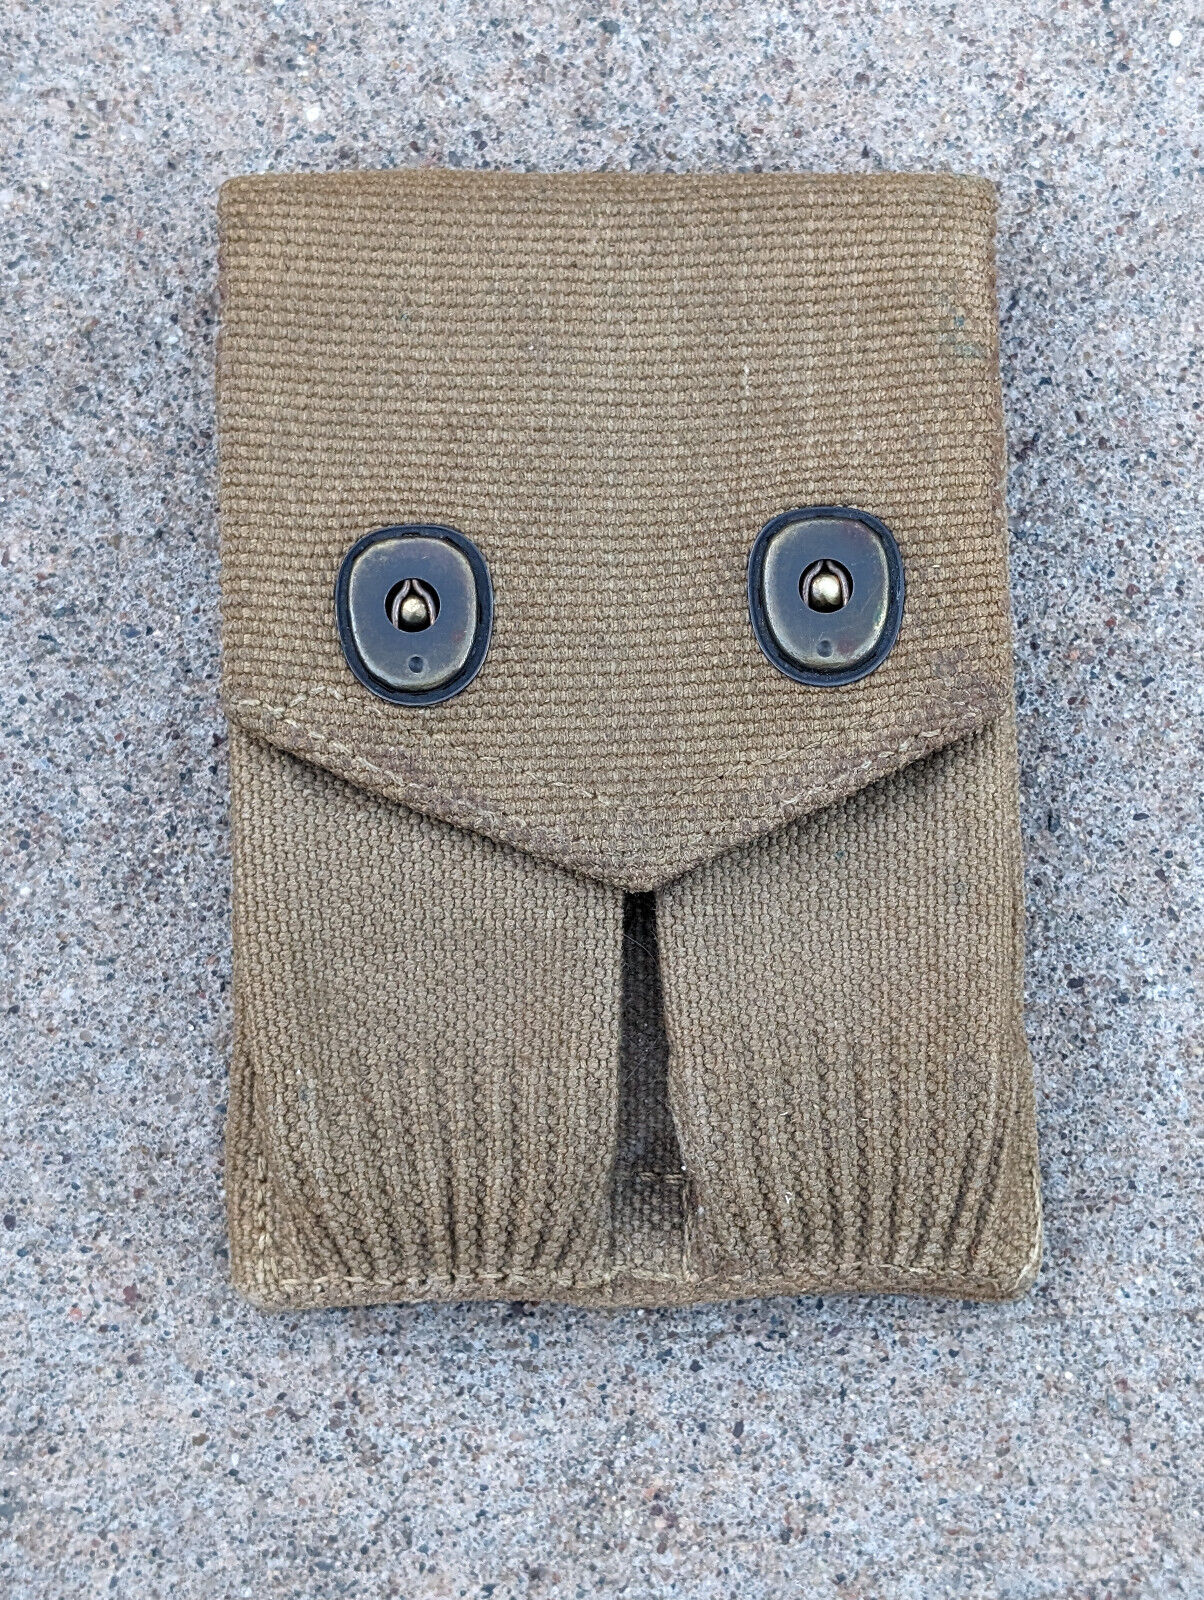 WWI US M1910 Dual Magazine Pouch M1911 Marked Mills - Dated SEPT 1918